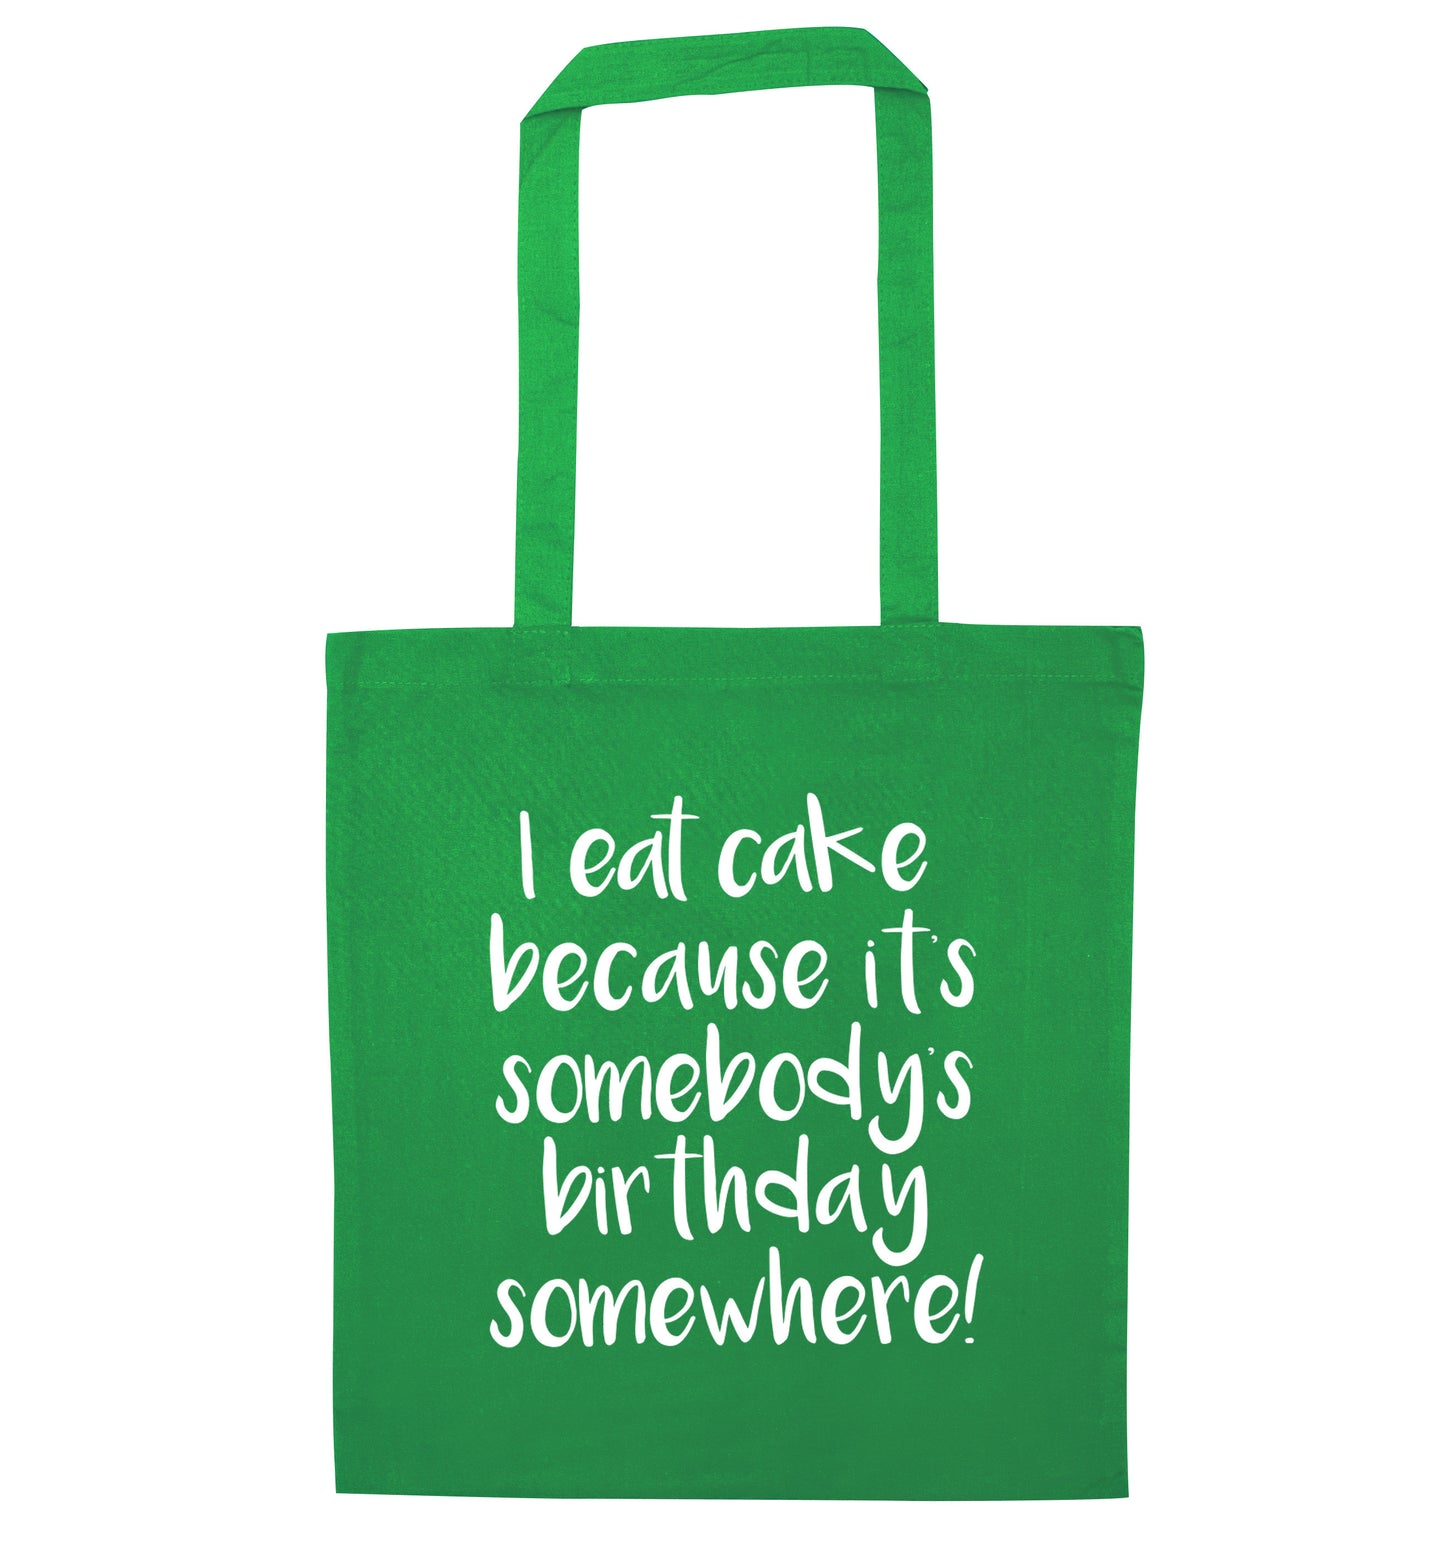 I eat cake because it's somebody's birthday somewhere! green tote bag